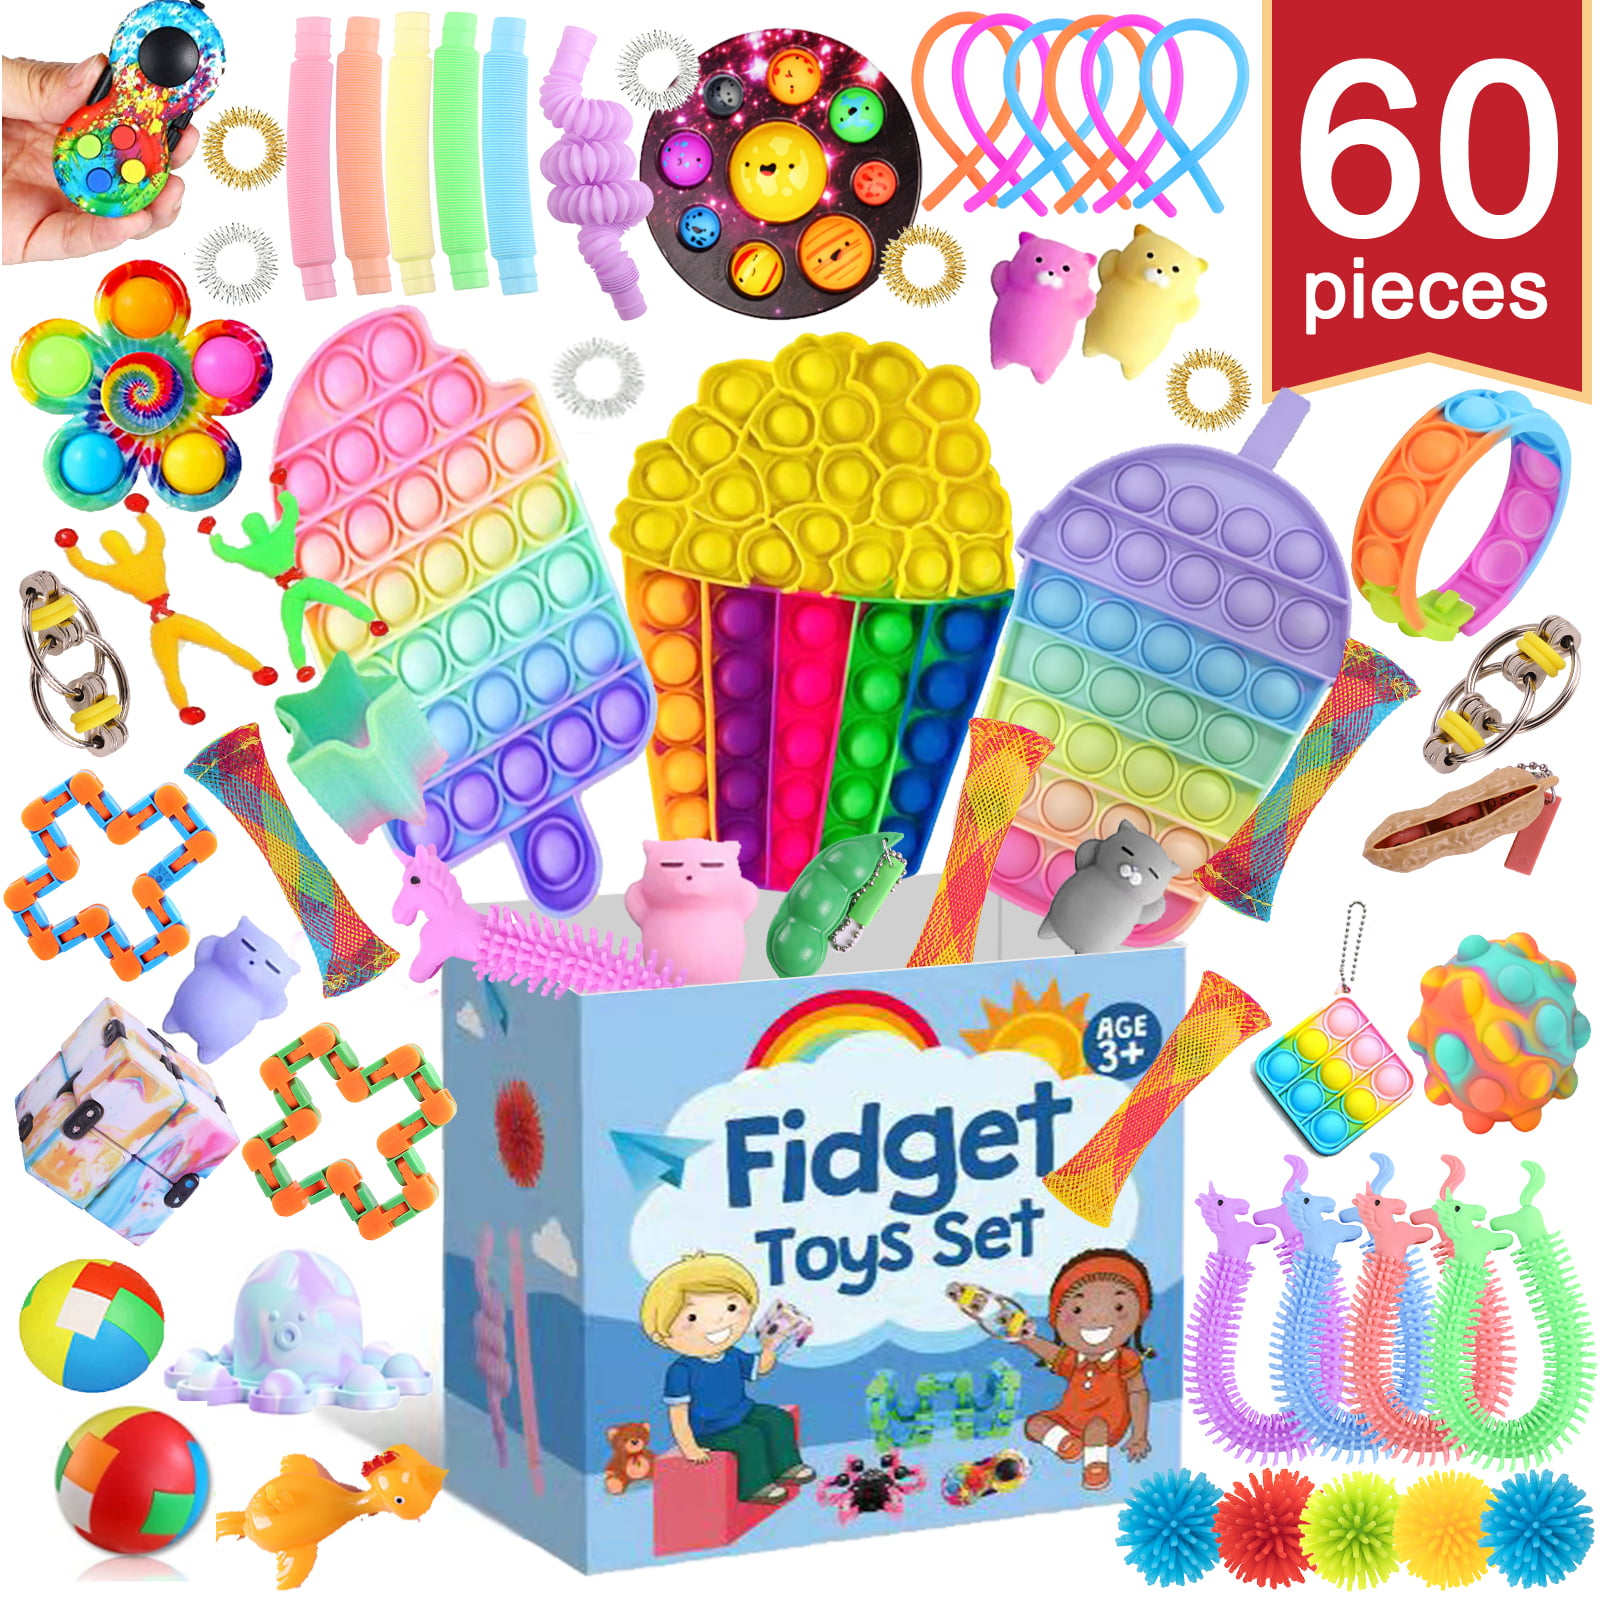 Dropship Pop Fidget Toys Multi-Item Fidget Toy Pack Sensory Fidget Pack Anti-Anxiety  Stress Relief Fidget Toys Set Party Favors Birthday Gifts For Adults Kids  (24Pcs-A) to Sell Online at a Lower Price